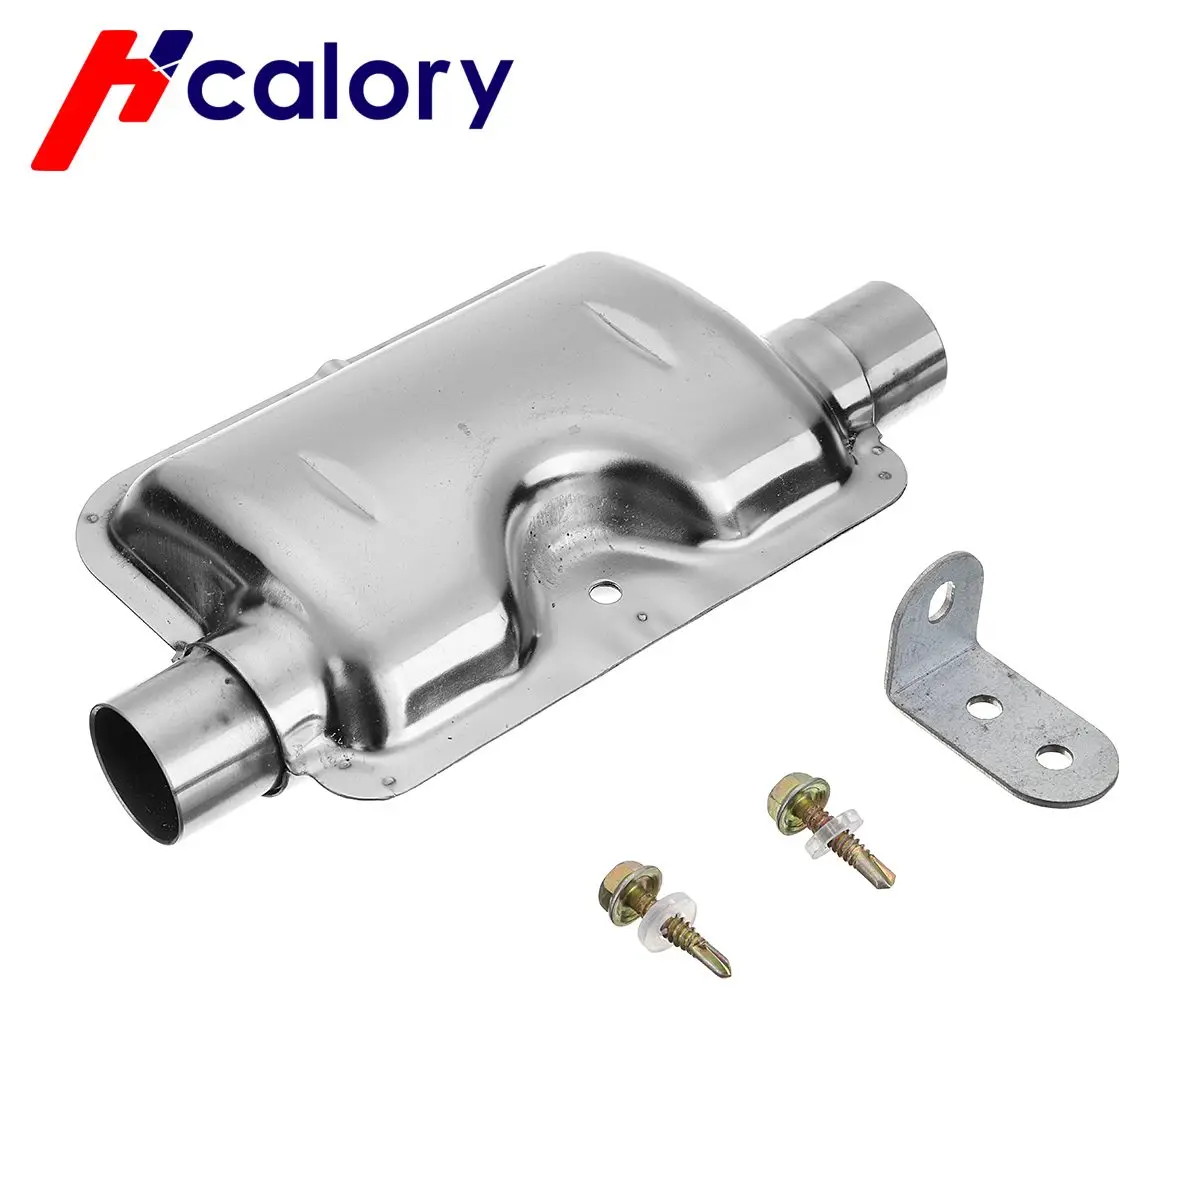 Lencer exhaust muffler 24mm clamps bracket and 60cm exhaust pipe for car heater parking thumb200